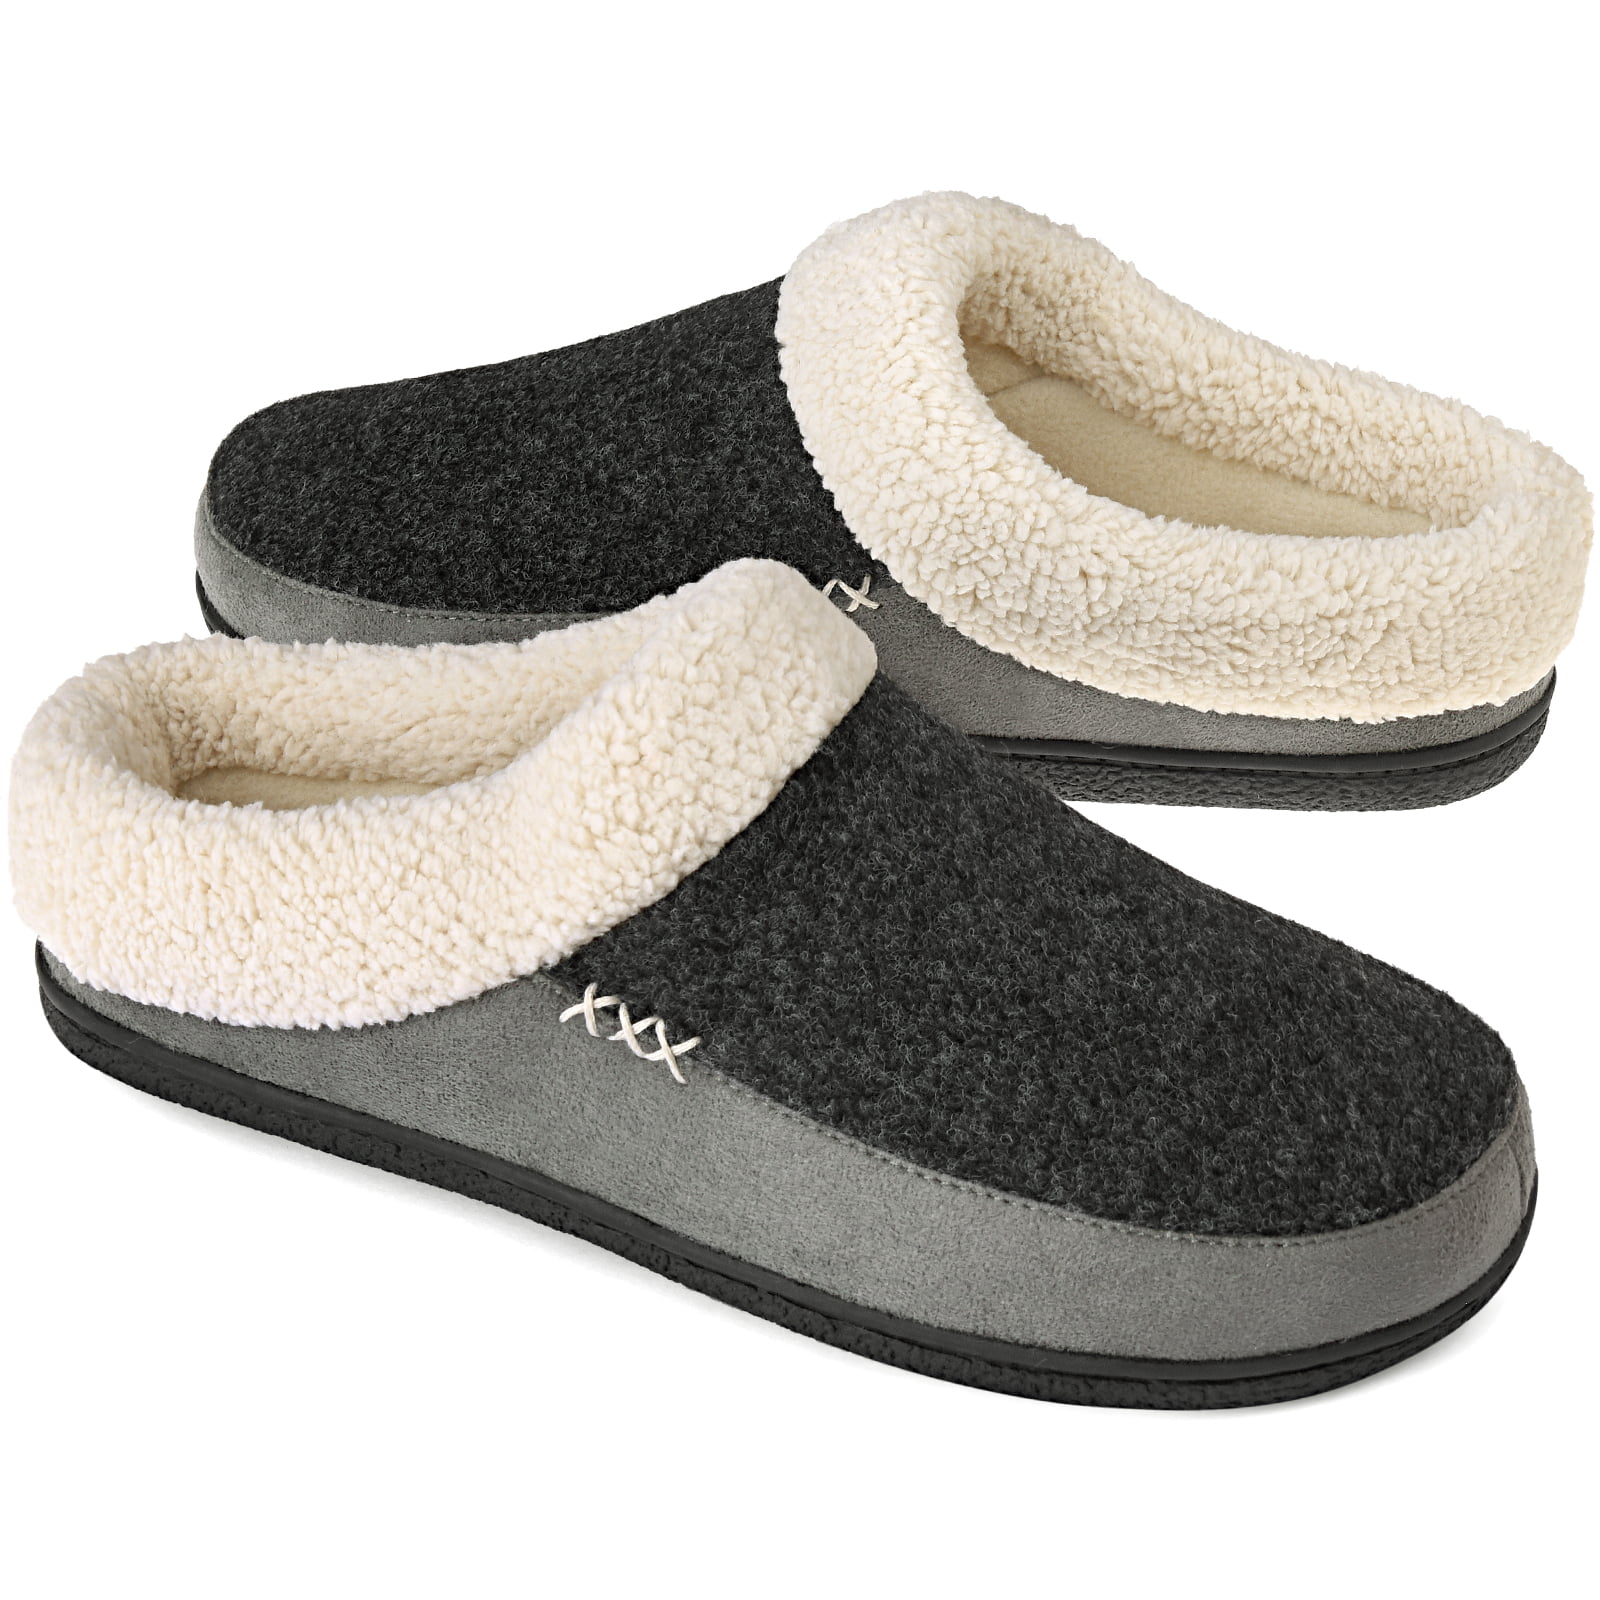 men's wool house shoes